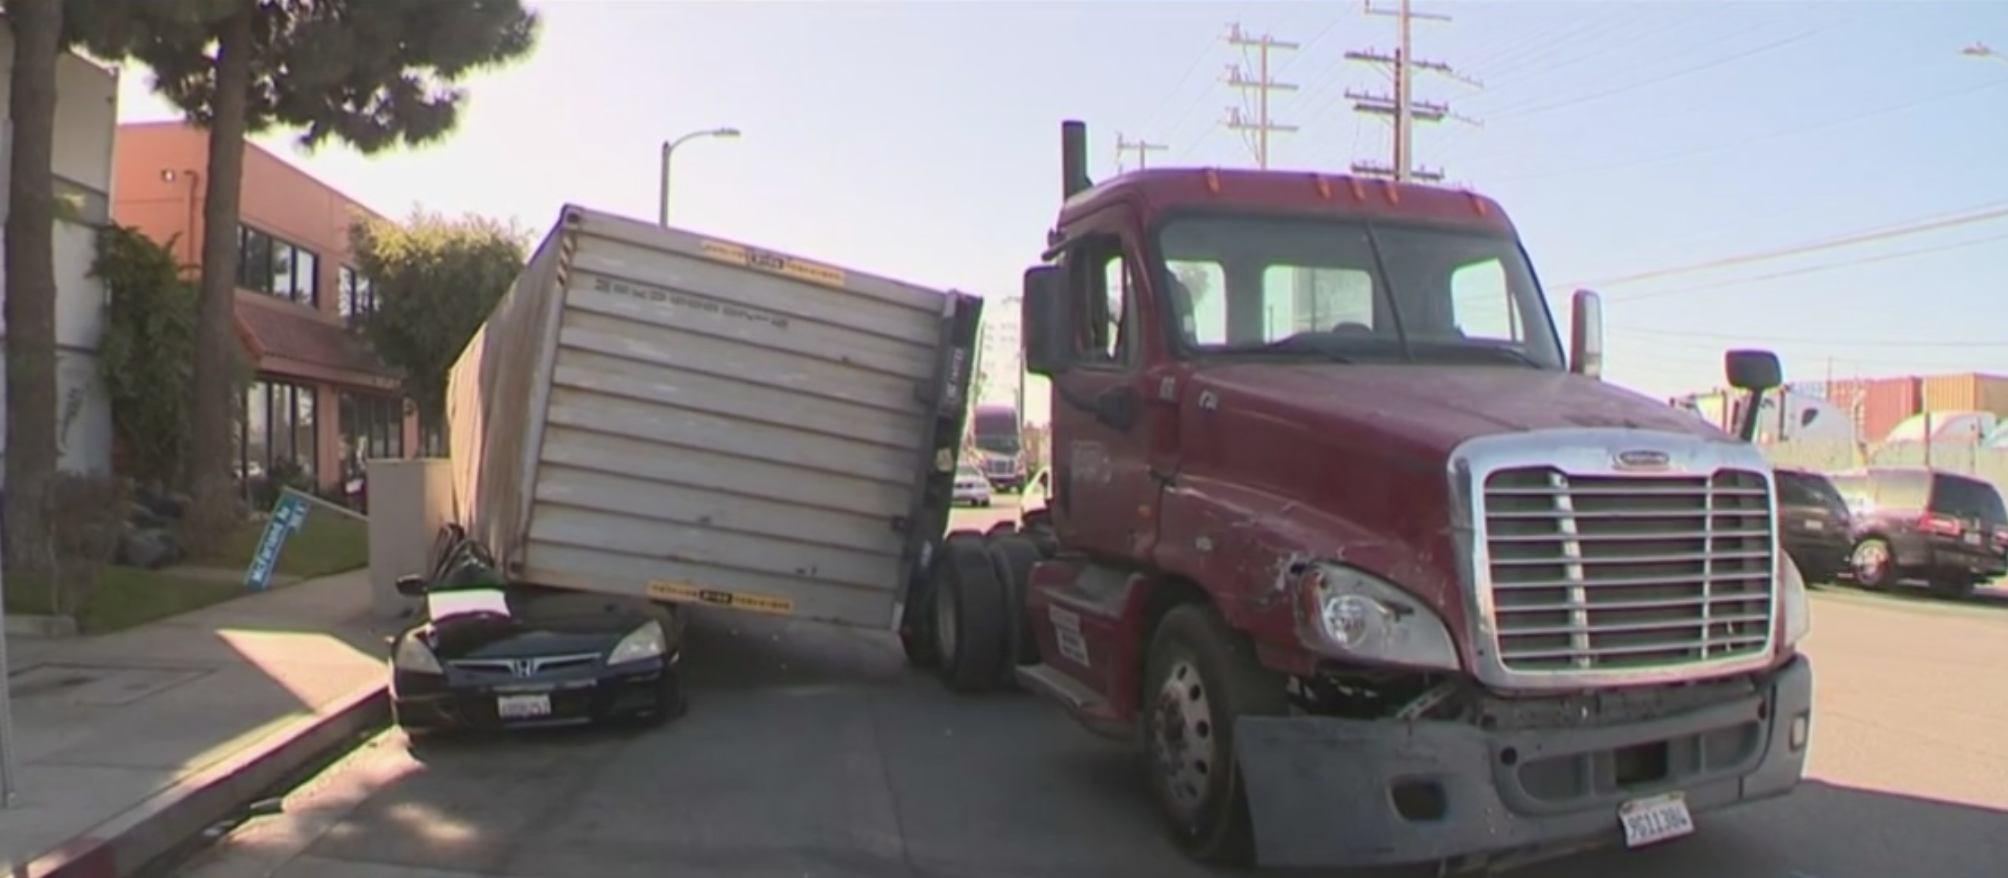 Police Patrolling Big Rig Traffic In Wilmington Neighborhood After Shipping Container Crushes Car